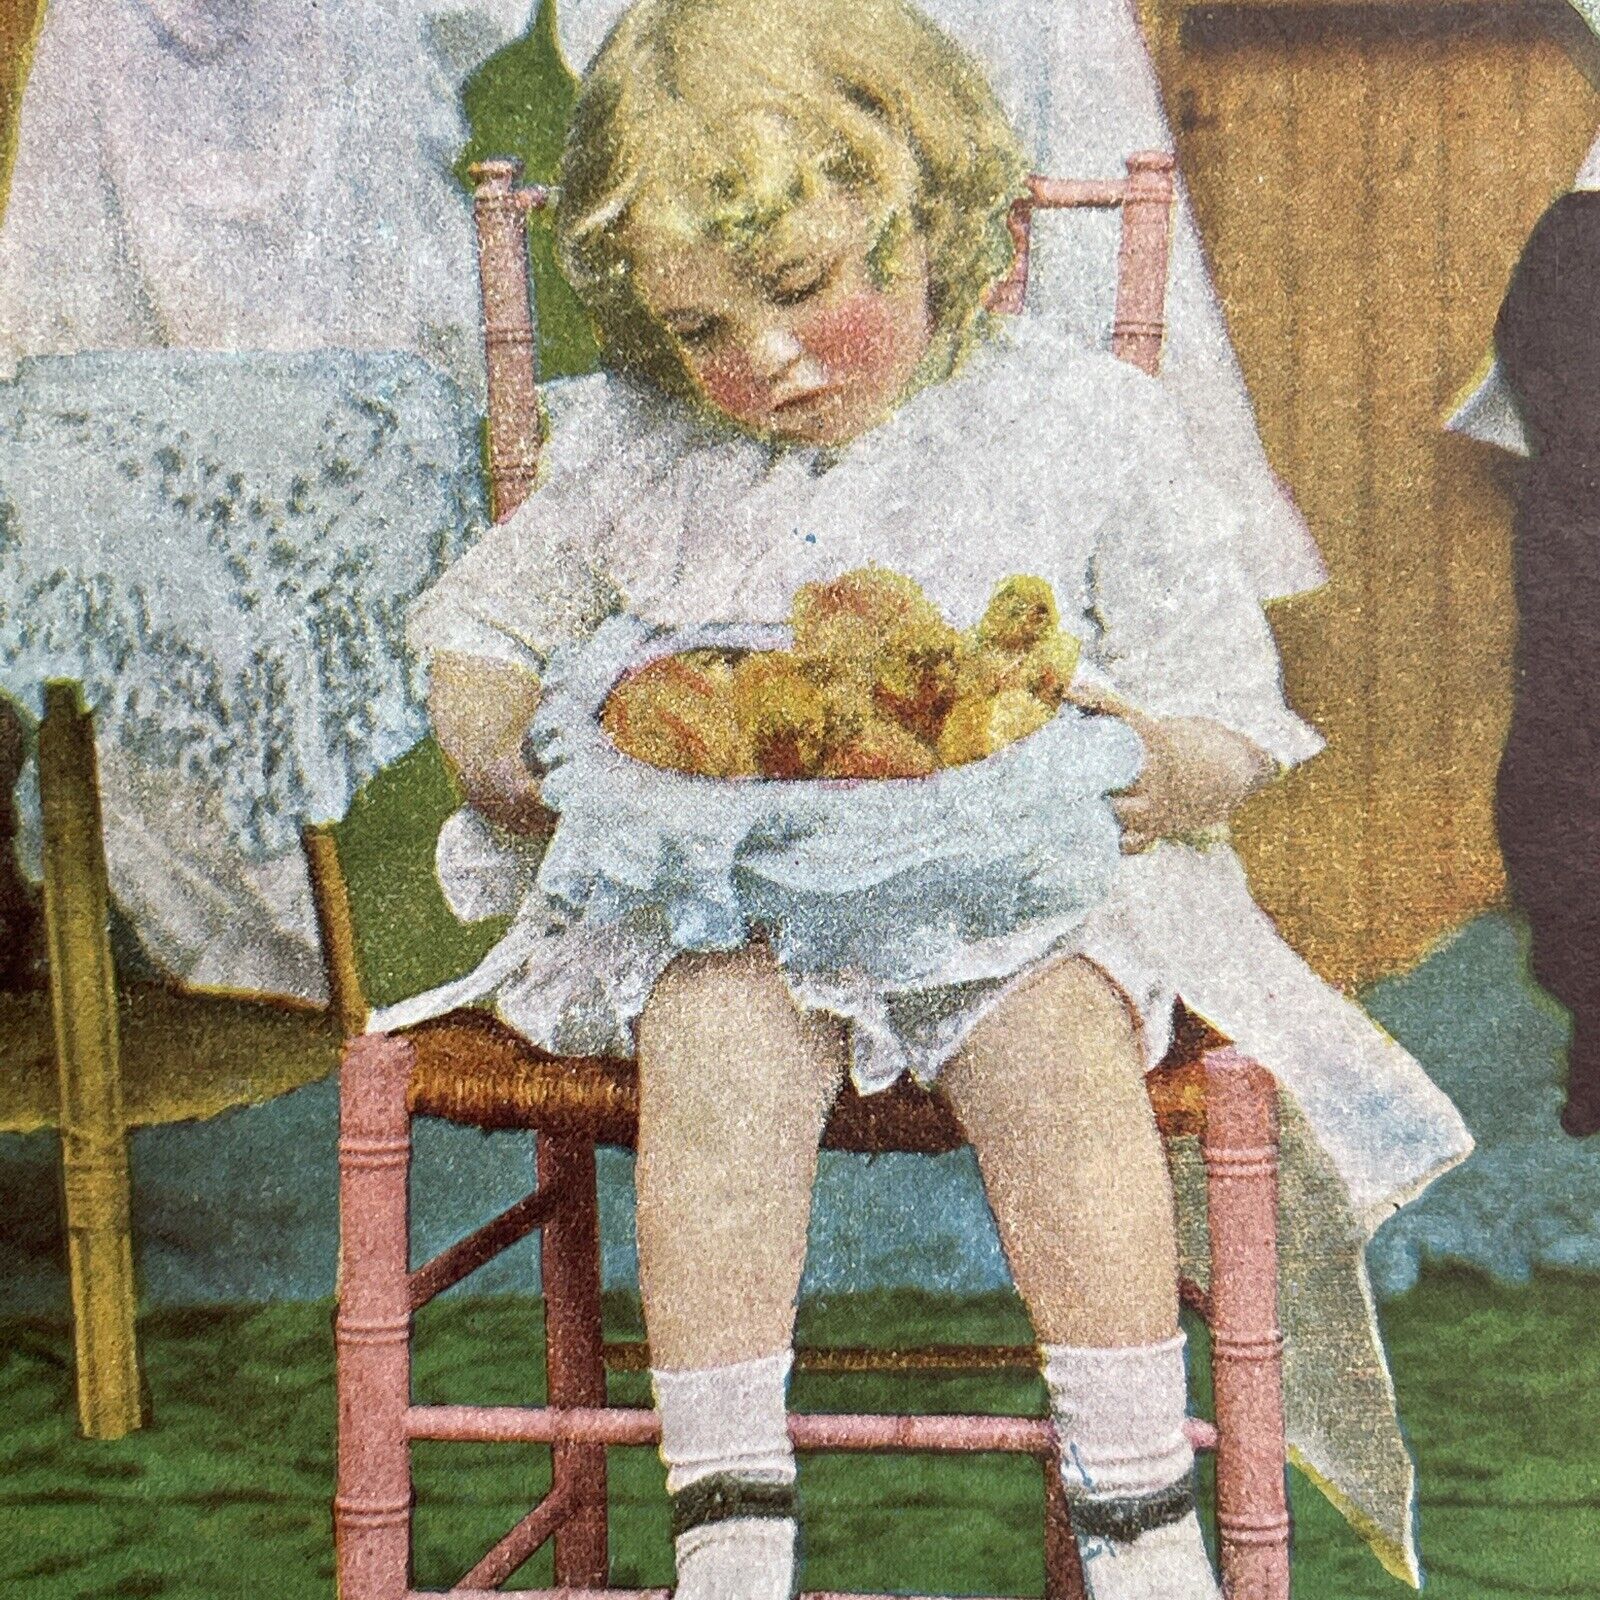 Antique 1892 Child With Basket Of Chicks Chickens Stereoview Photo Card P1232